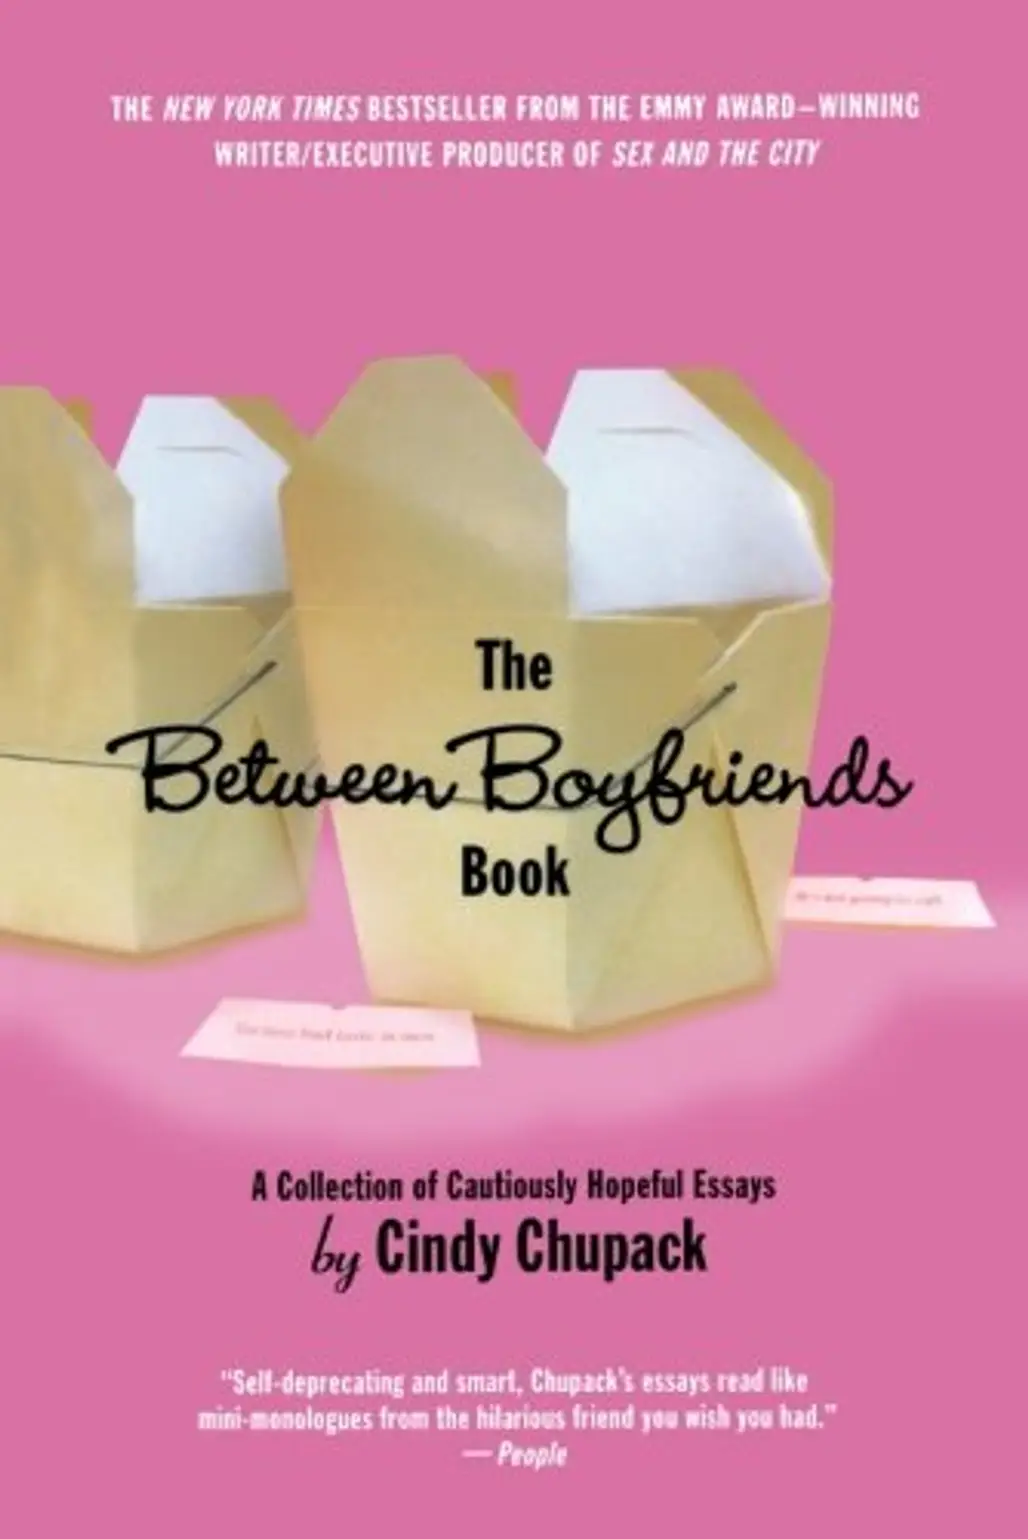 The between Boyfriends Book: a Collection of Cautiously Hopeful Essays by Cindy Chupack